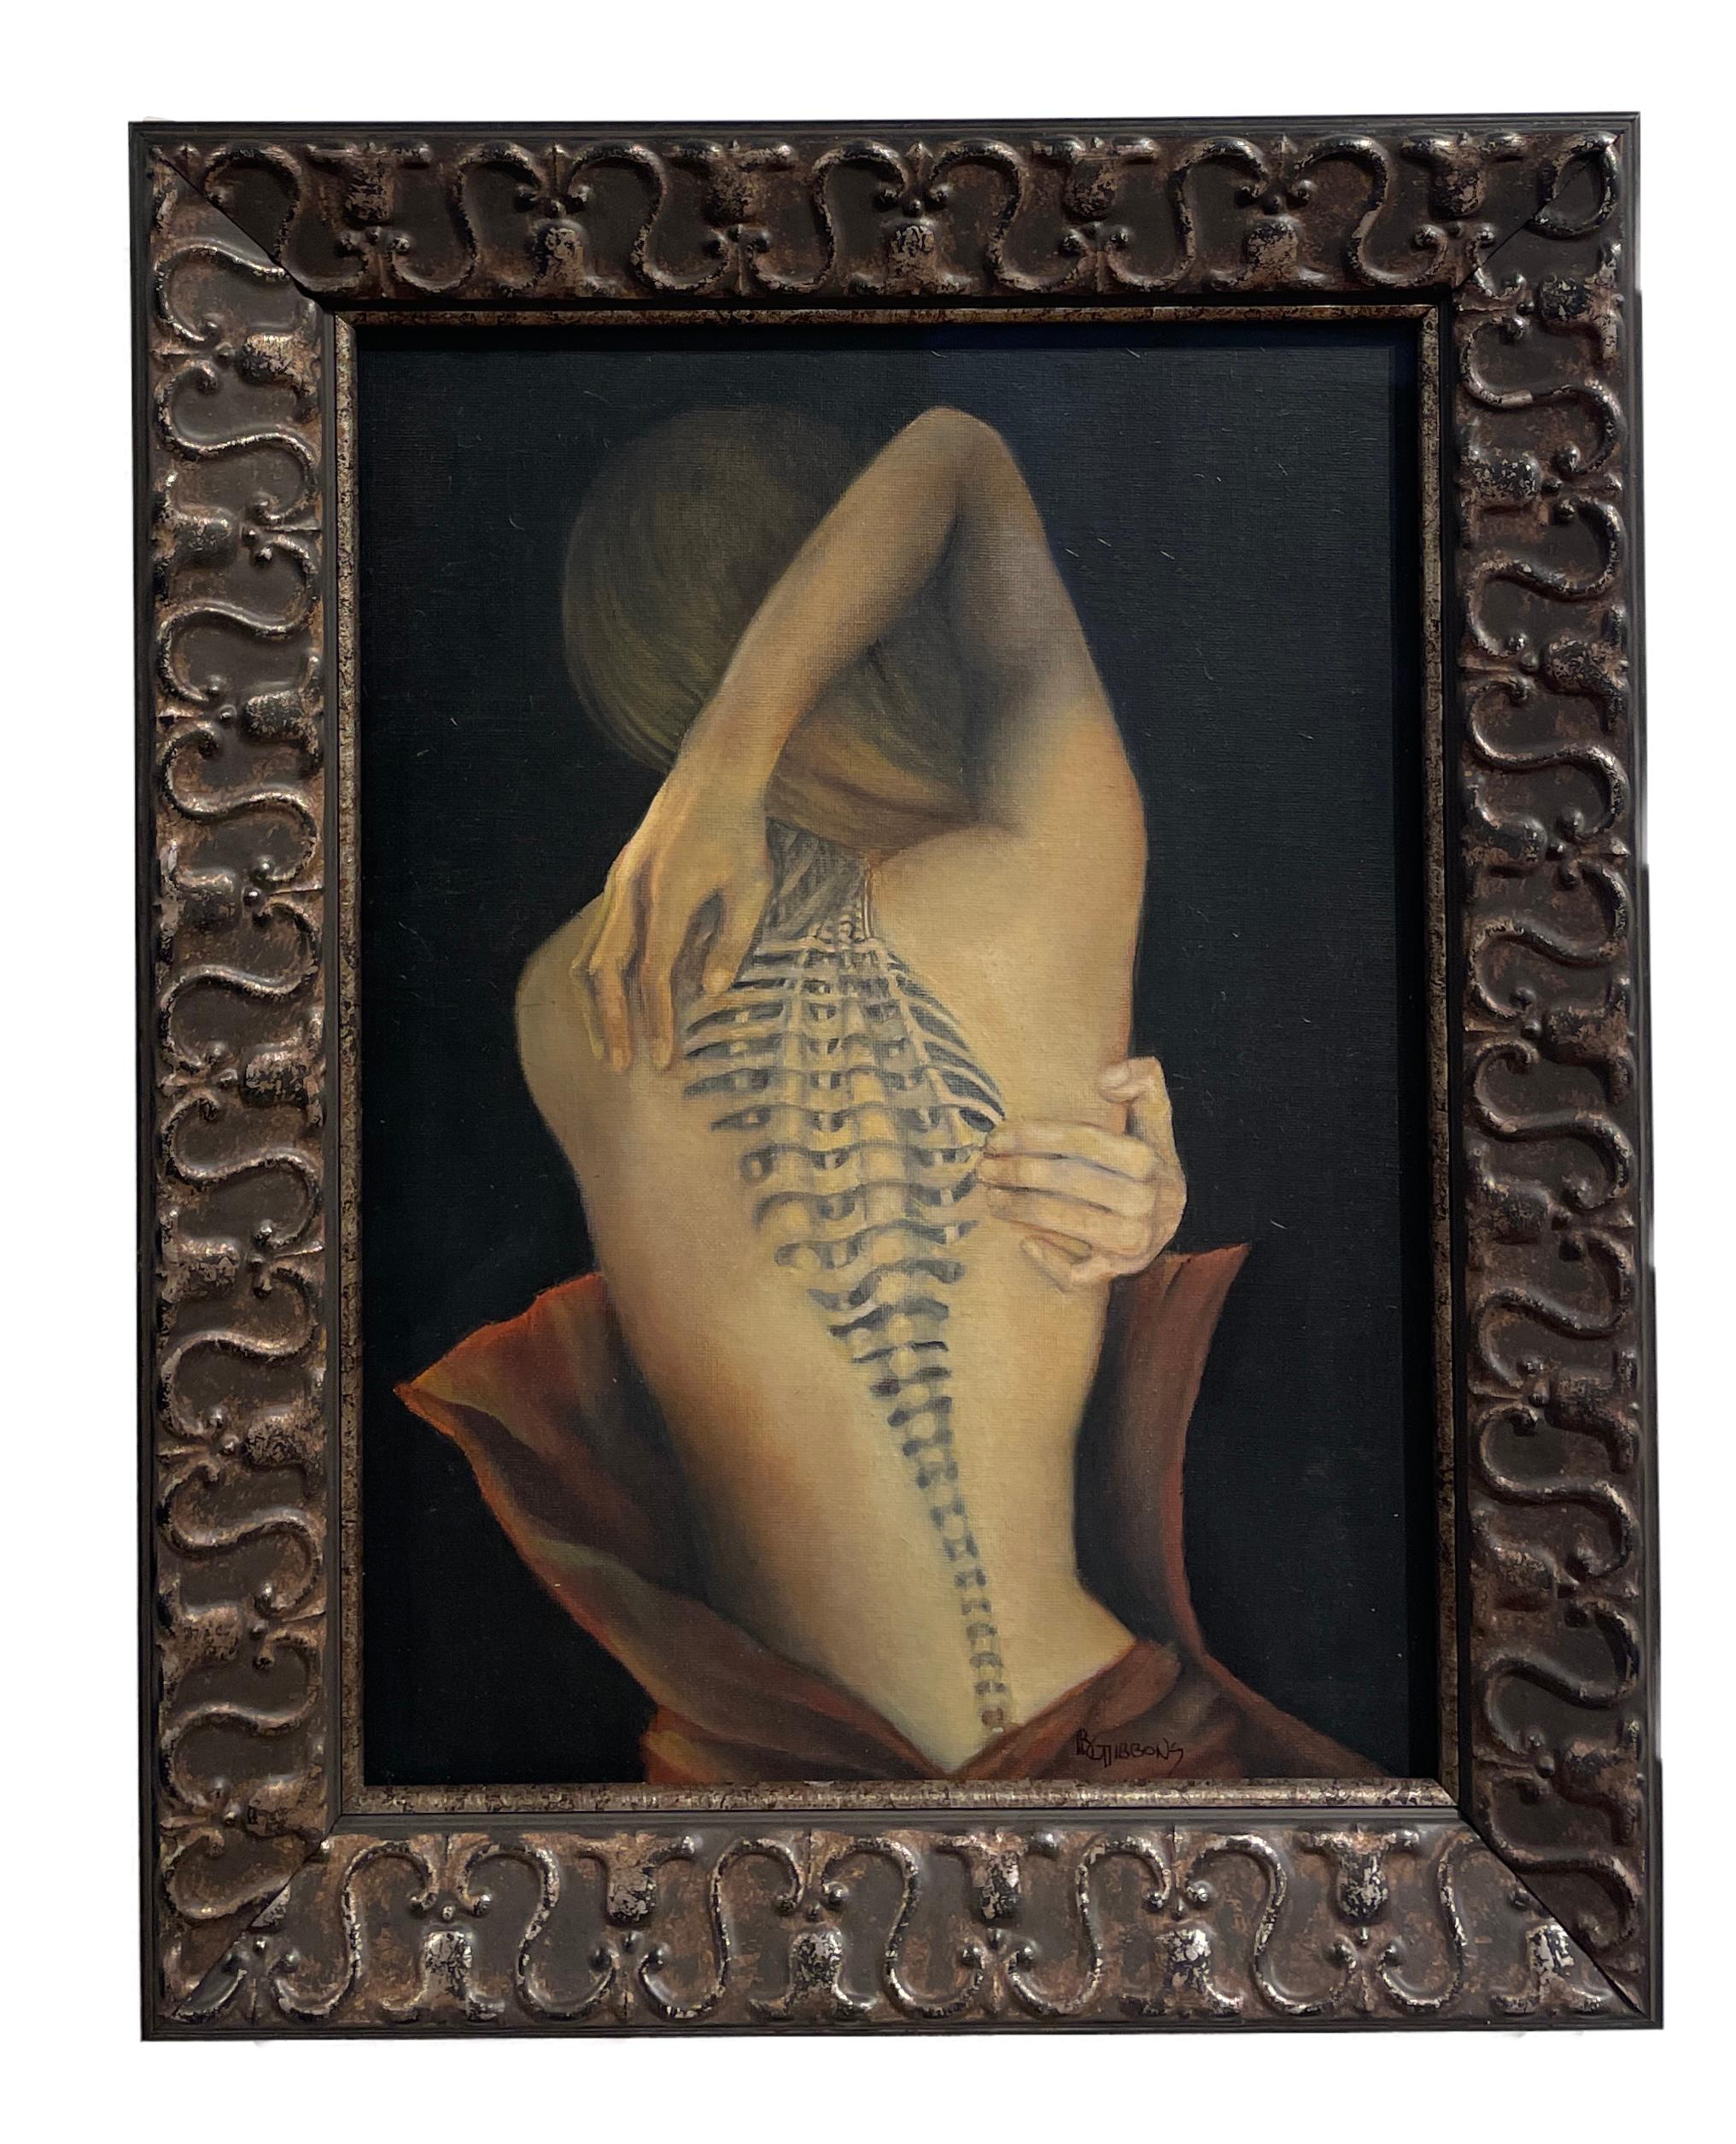 Trompe L'Oeil - Female Nude with Intricate Tattoo of the Spinal Column, Framed - Painting by Richard Gibbons